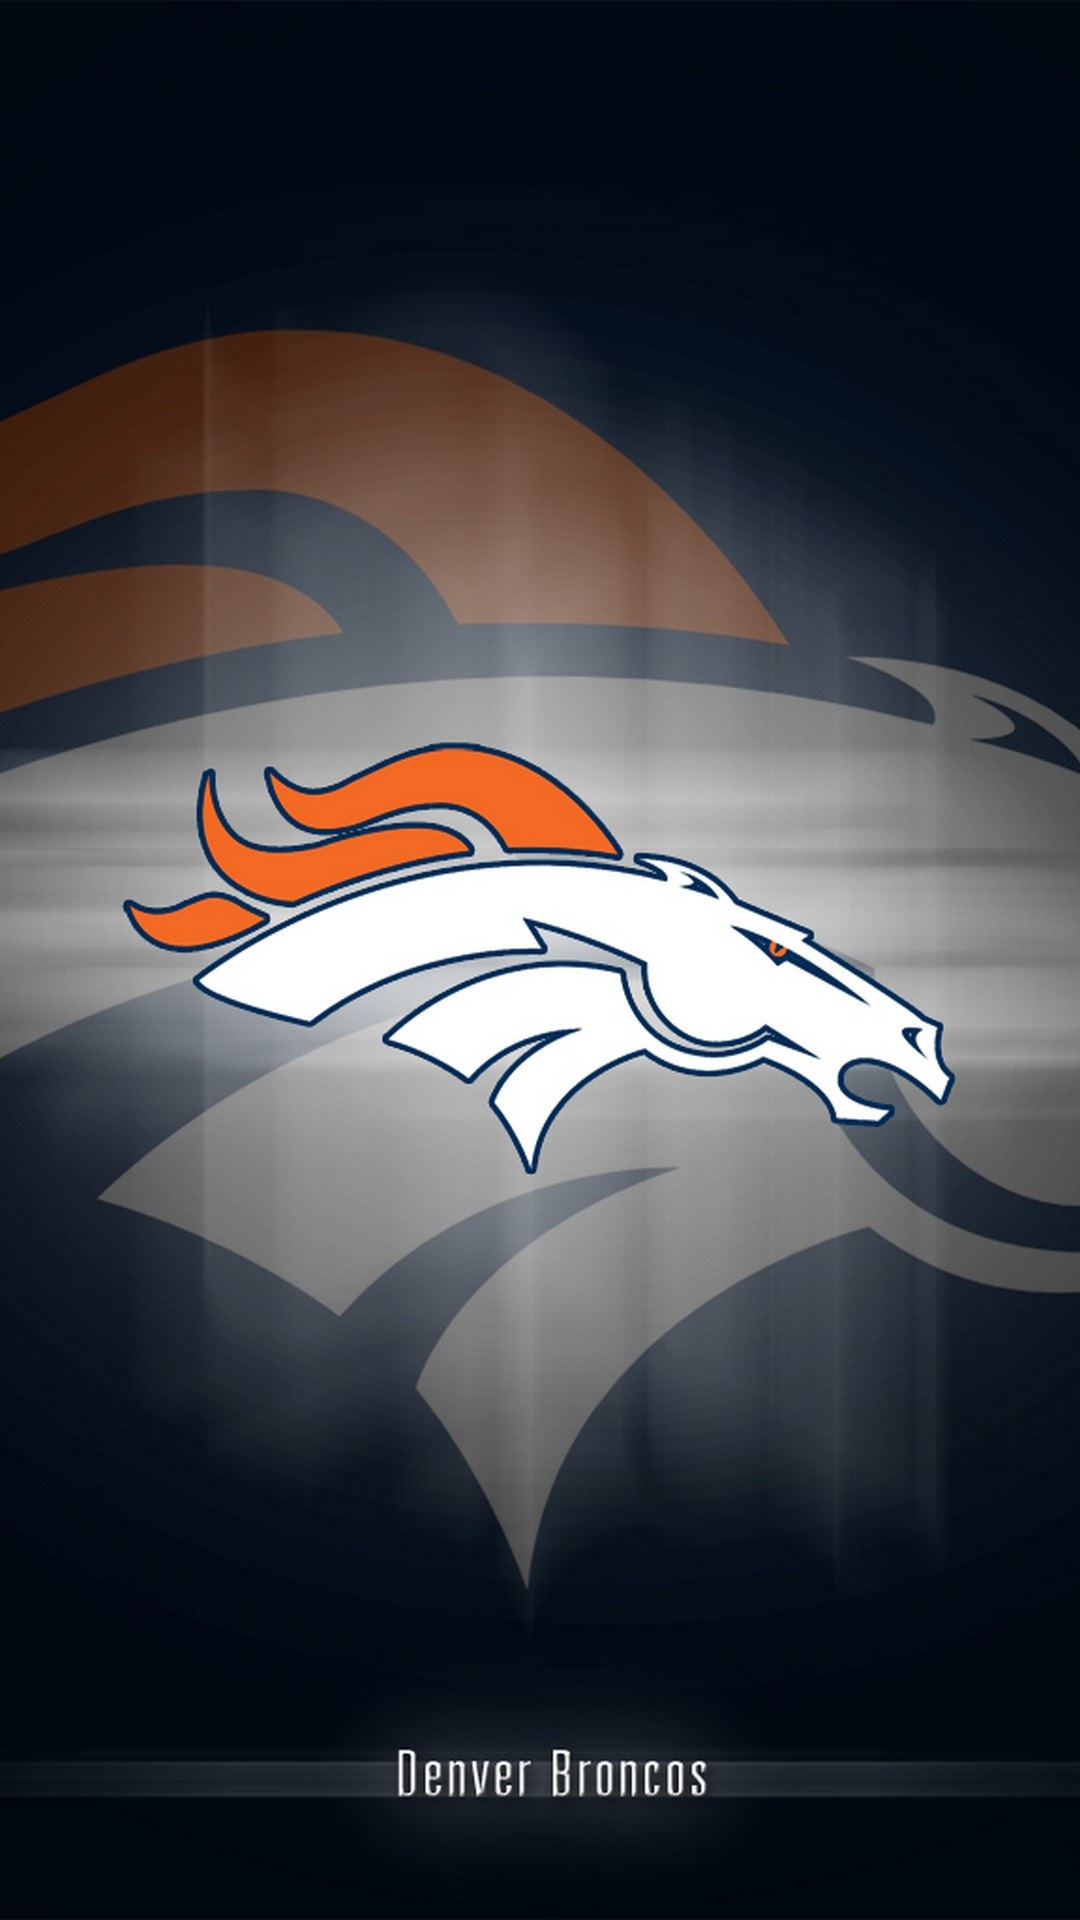 Denver Broncos iPhone Wallpaper High Quality with high-resolution 1080x1920 pixel. Donwload and set as wallpaper for your iPhone X, iPhone XS home screen backgrounds, XS Max, XR, iPhone8 lock screen wallpaper, iPhone 7, 6, SE and other mobile devices